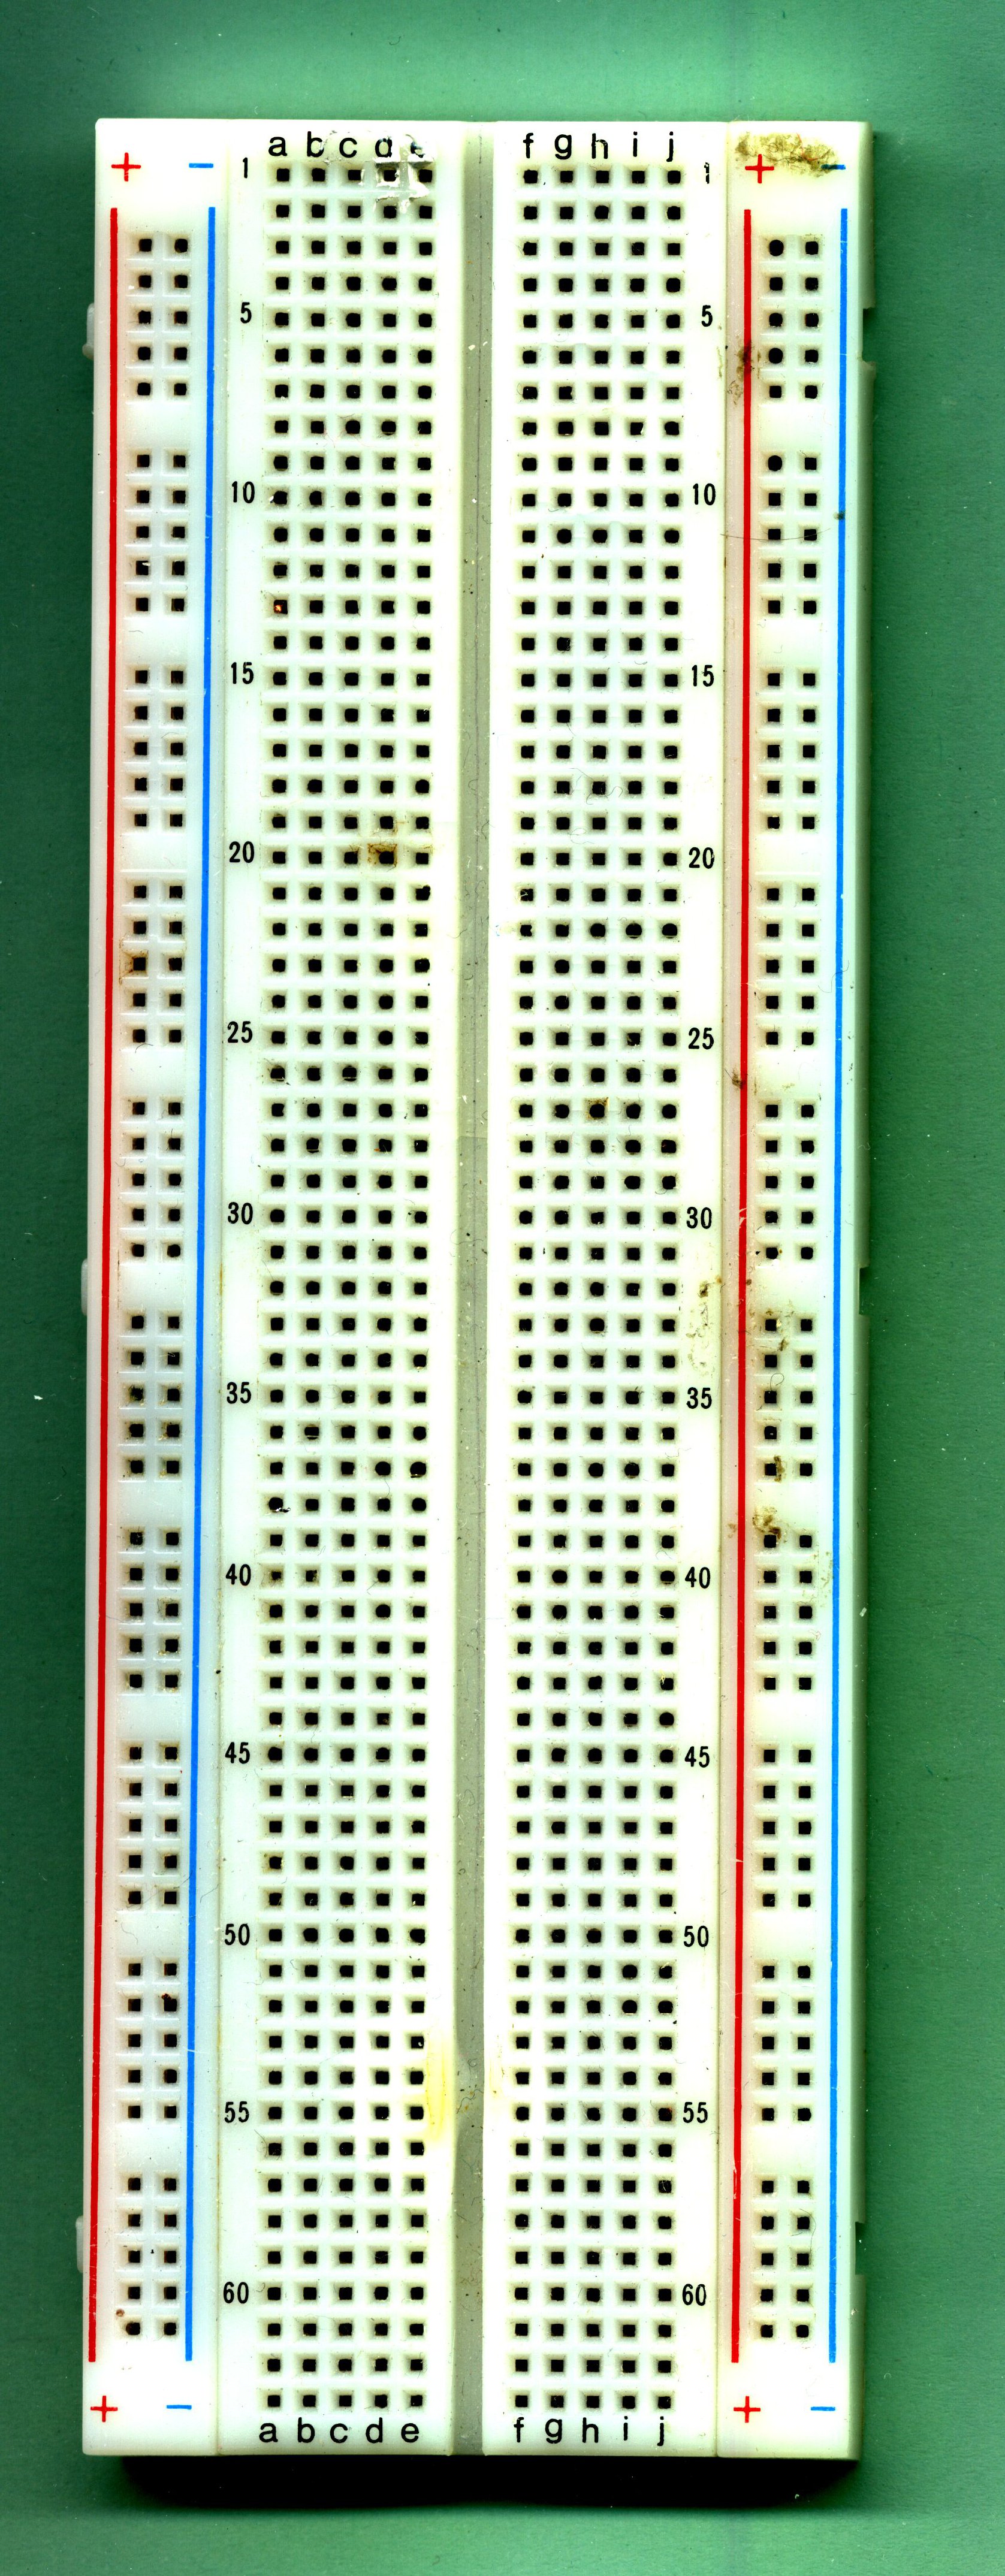 back view of a breadboard